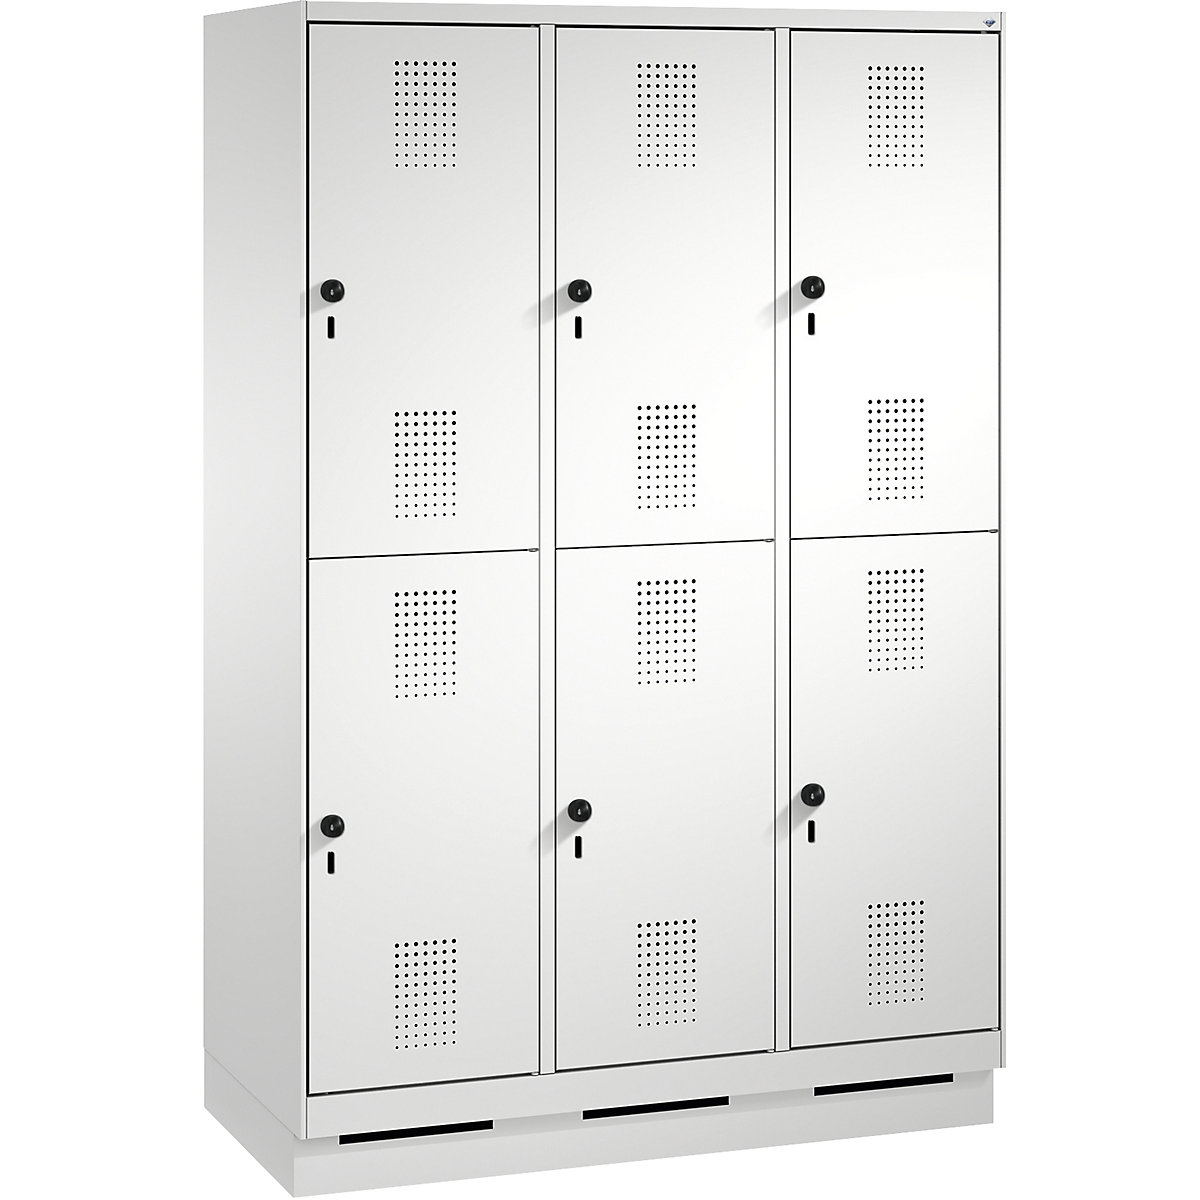 EVOLO cloakroom locker, double tier, with plinth – C+P, 3 compartments, 2 shelf compartments each, compartment width 400 mm, light grey-17